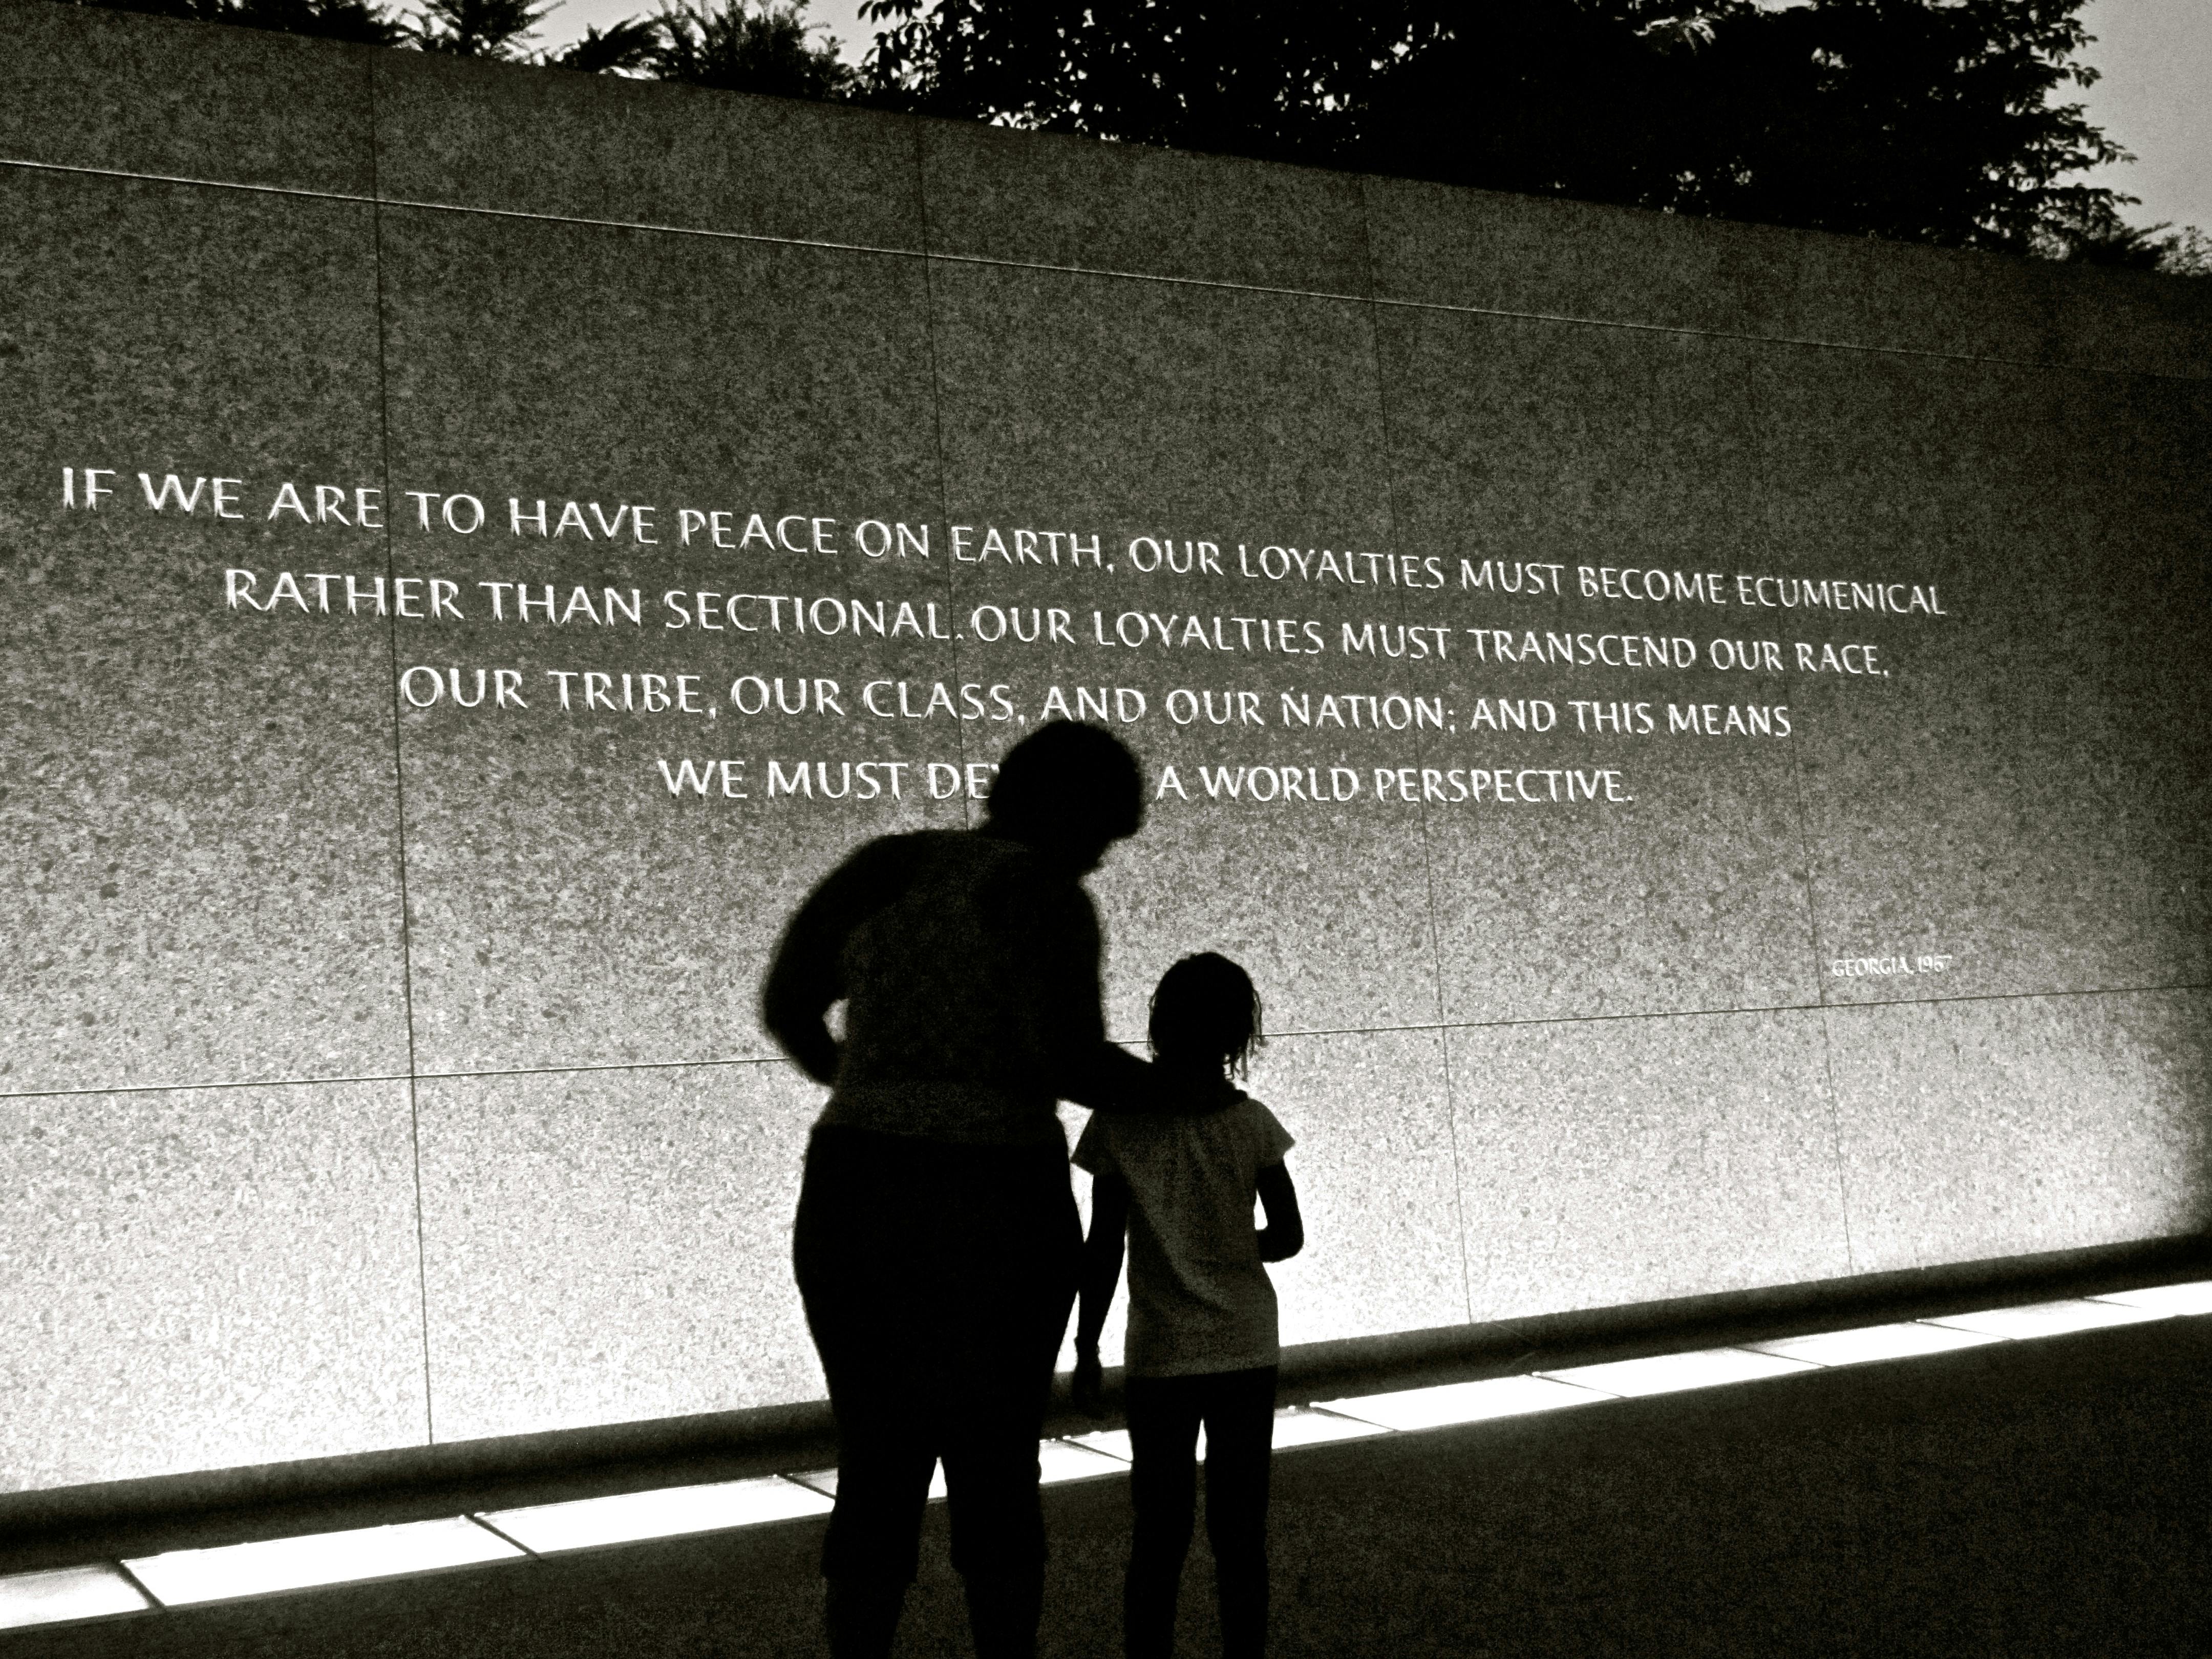 A twilight visit to the Martin Luther King Jr. Memorial in Washington DC.